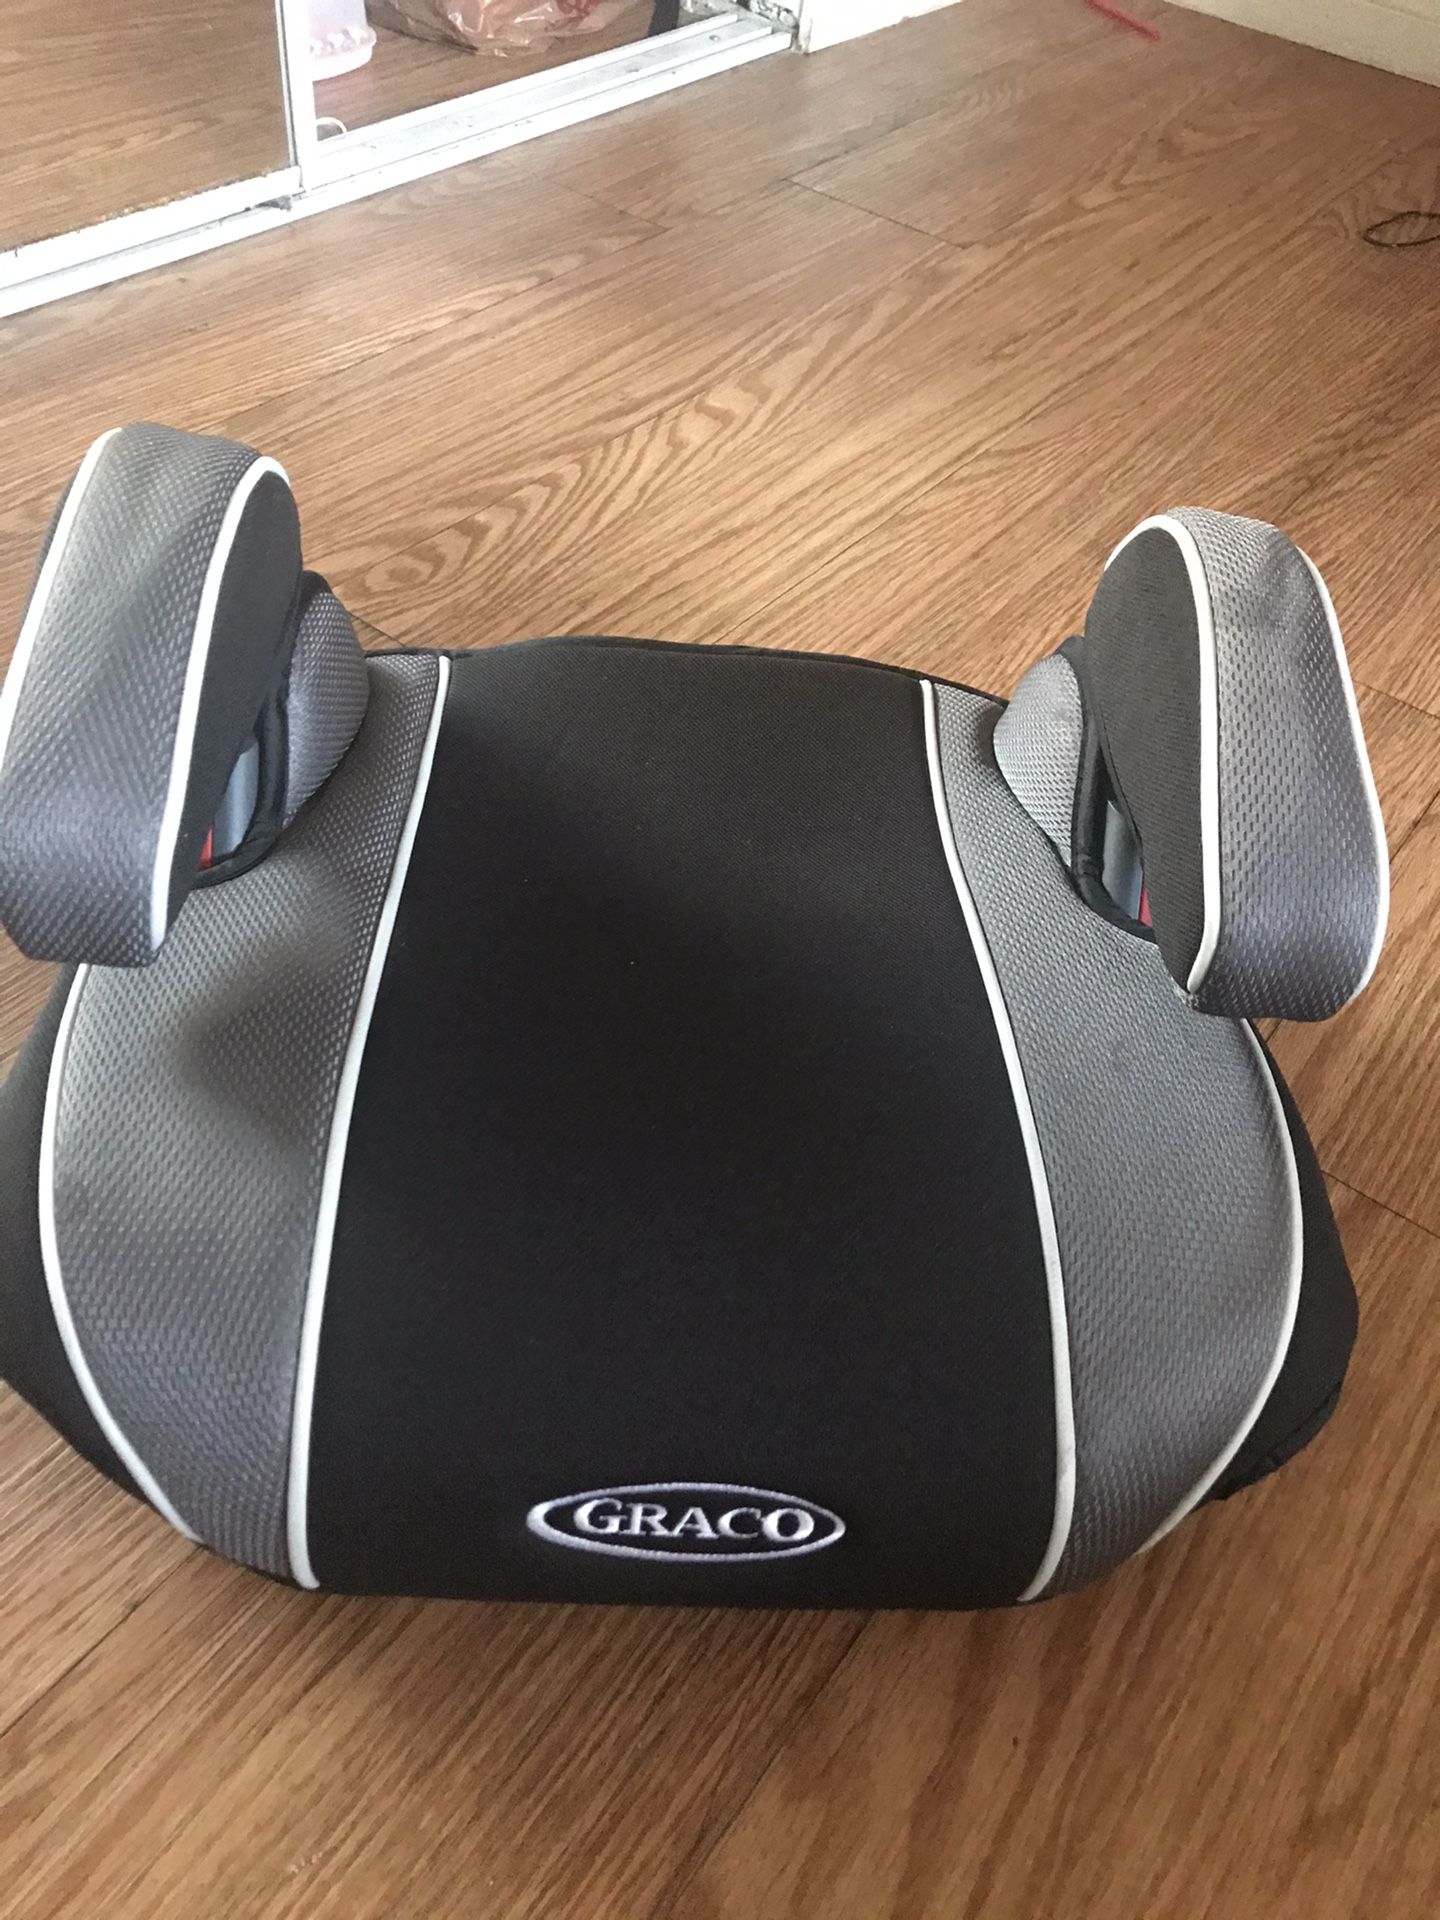 Graco booster seat for kids